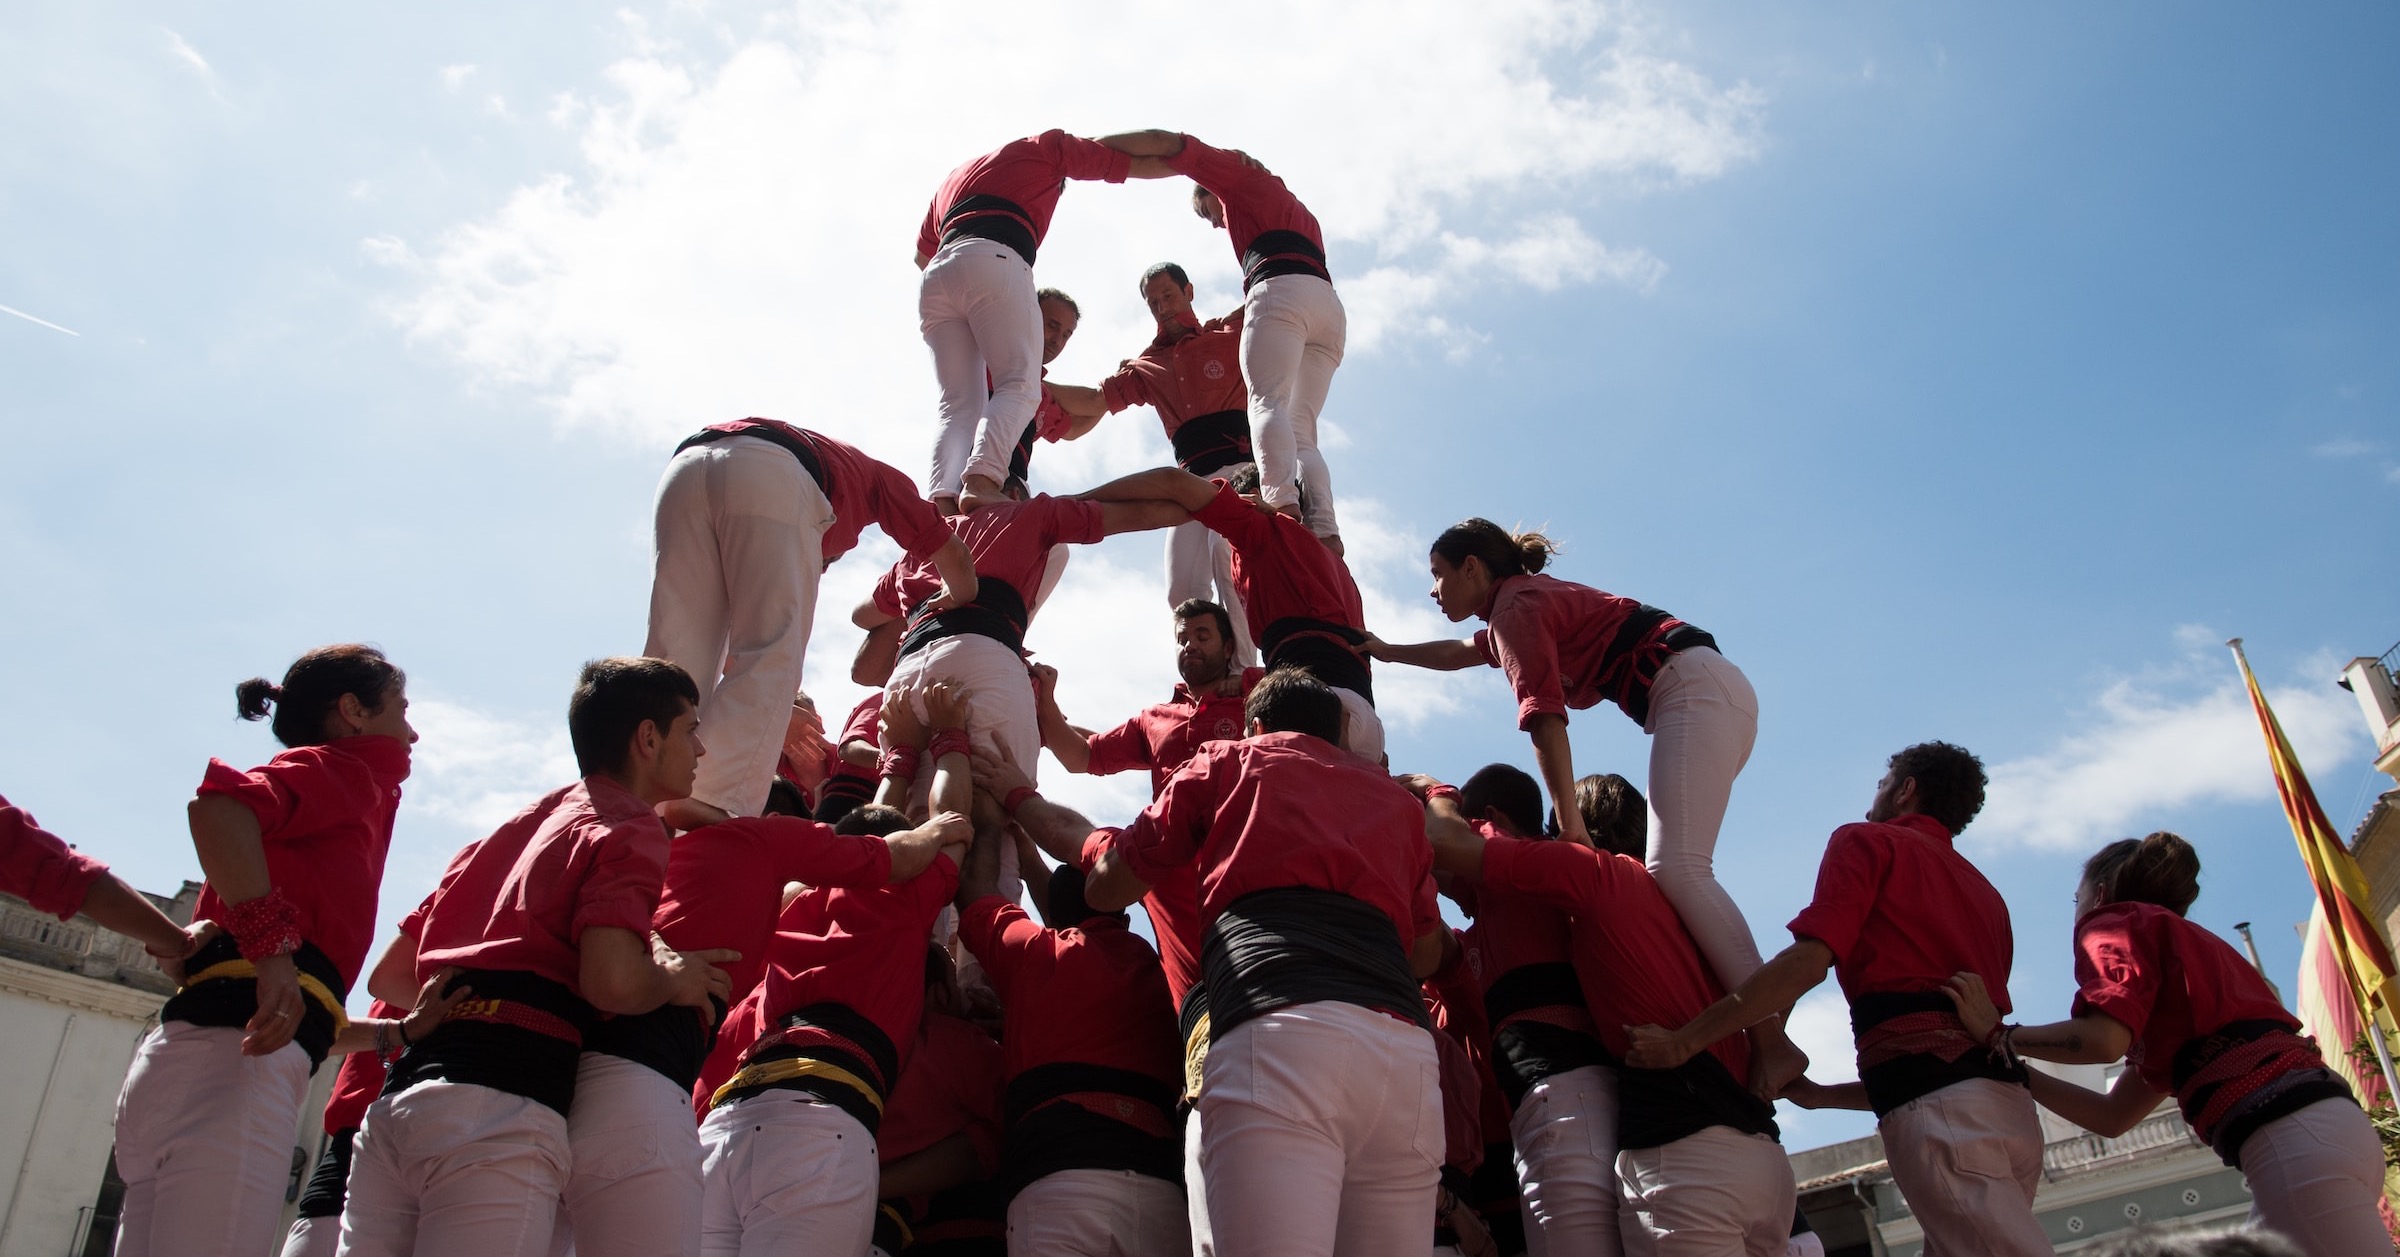 group of people forming a human tower castell